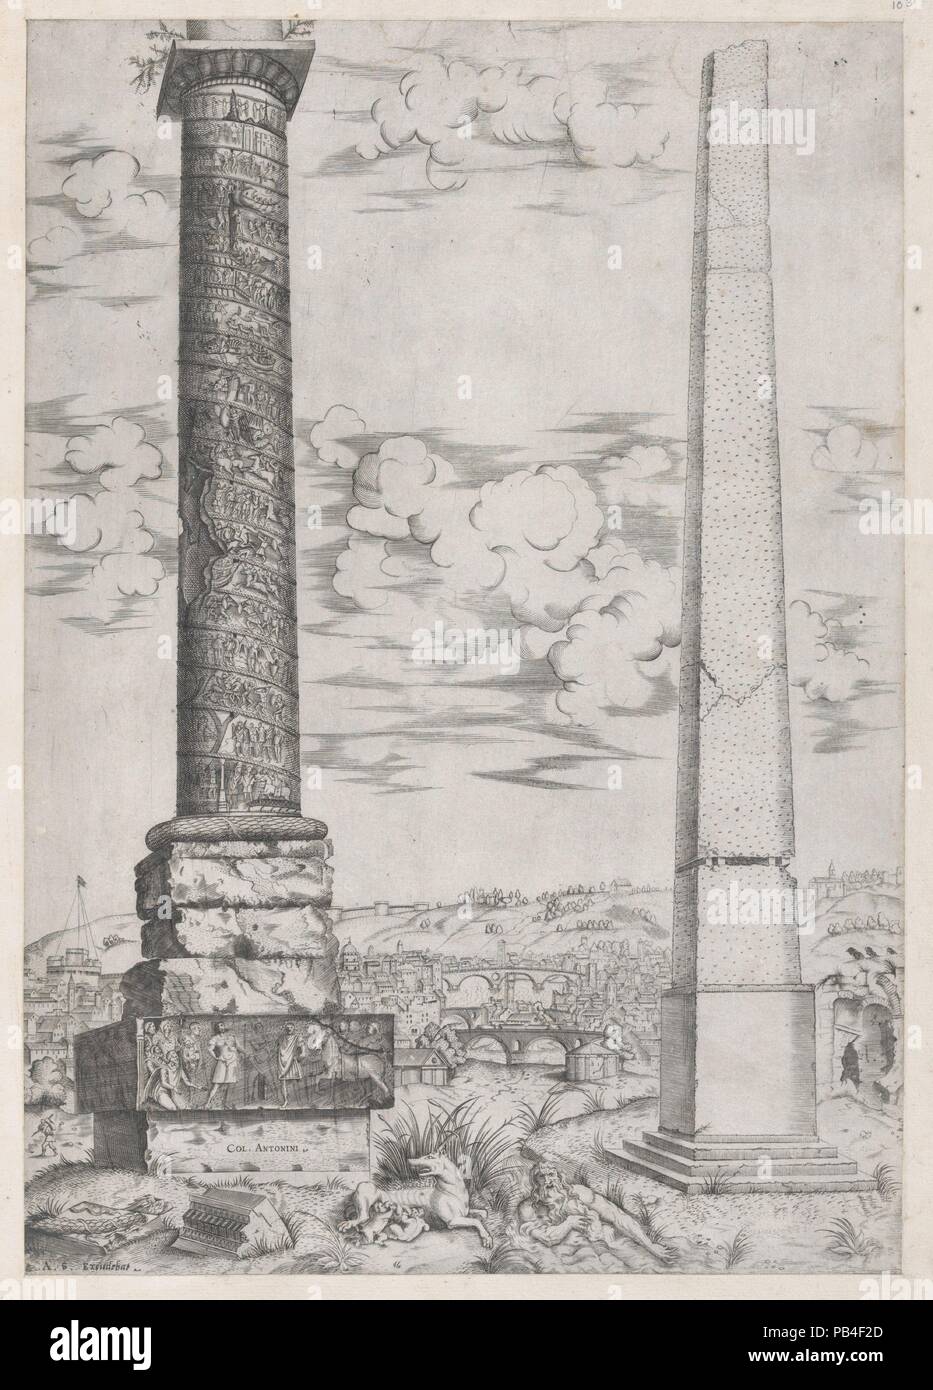 Speculum Romanae Magnificentiae: Column of Antoninus and a Roman Obelisk. Artist: Attributed to Enea Vico (Italian, Parma 1523-1567 Ferrara). Dimensions: mount: 17 15/16 x 12 5/8 in. (45.5 x 32 cm)  sheet: 22 1/16 x 16 3/4 in. (56.1 x 42.6 cm). Publisher: Antonio Lafreri (French, Orgelet, Franche-Comte ca. 1512-1577 Rome). Series/Portfolio: Speculum Romanae Magnificentiae. Date: ca. 1543-70.  This print comes from the museum's copy of the Speculum Romanae Magnificentiae (The Mirror of Roman Magnificence) The Speculum found its origin in the publishing endeavors of Antonio Salamanca and Antonio Stock Photo